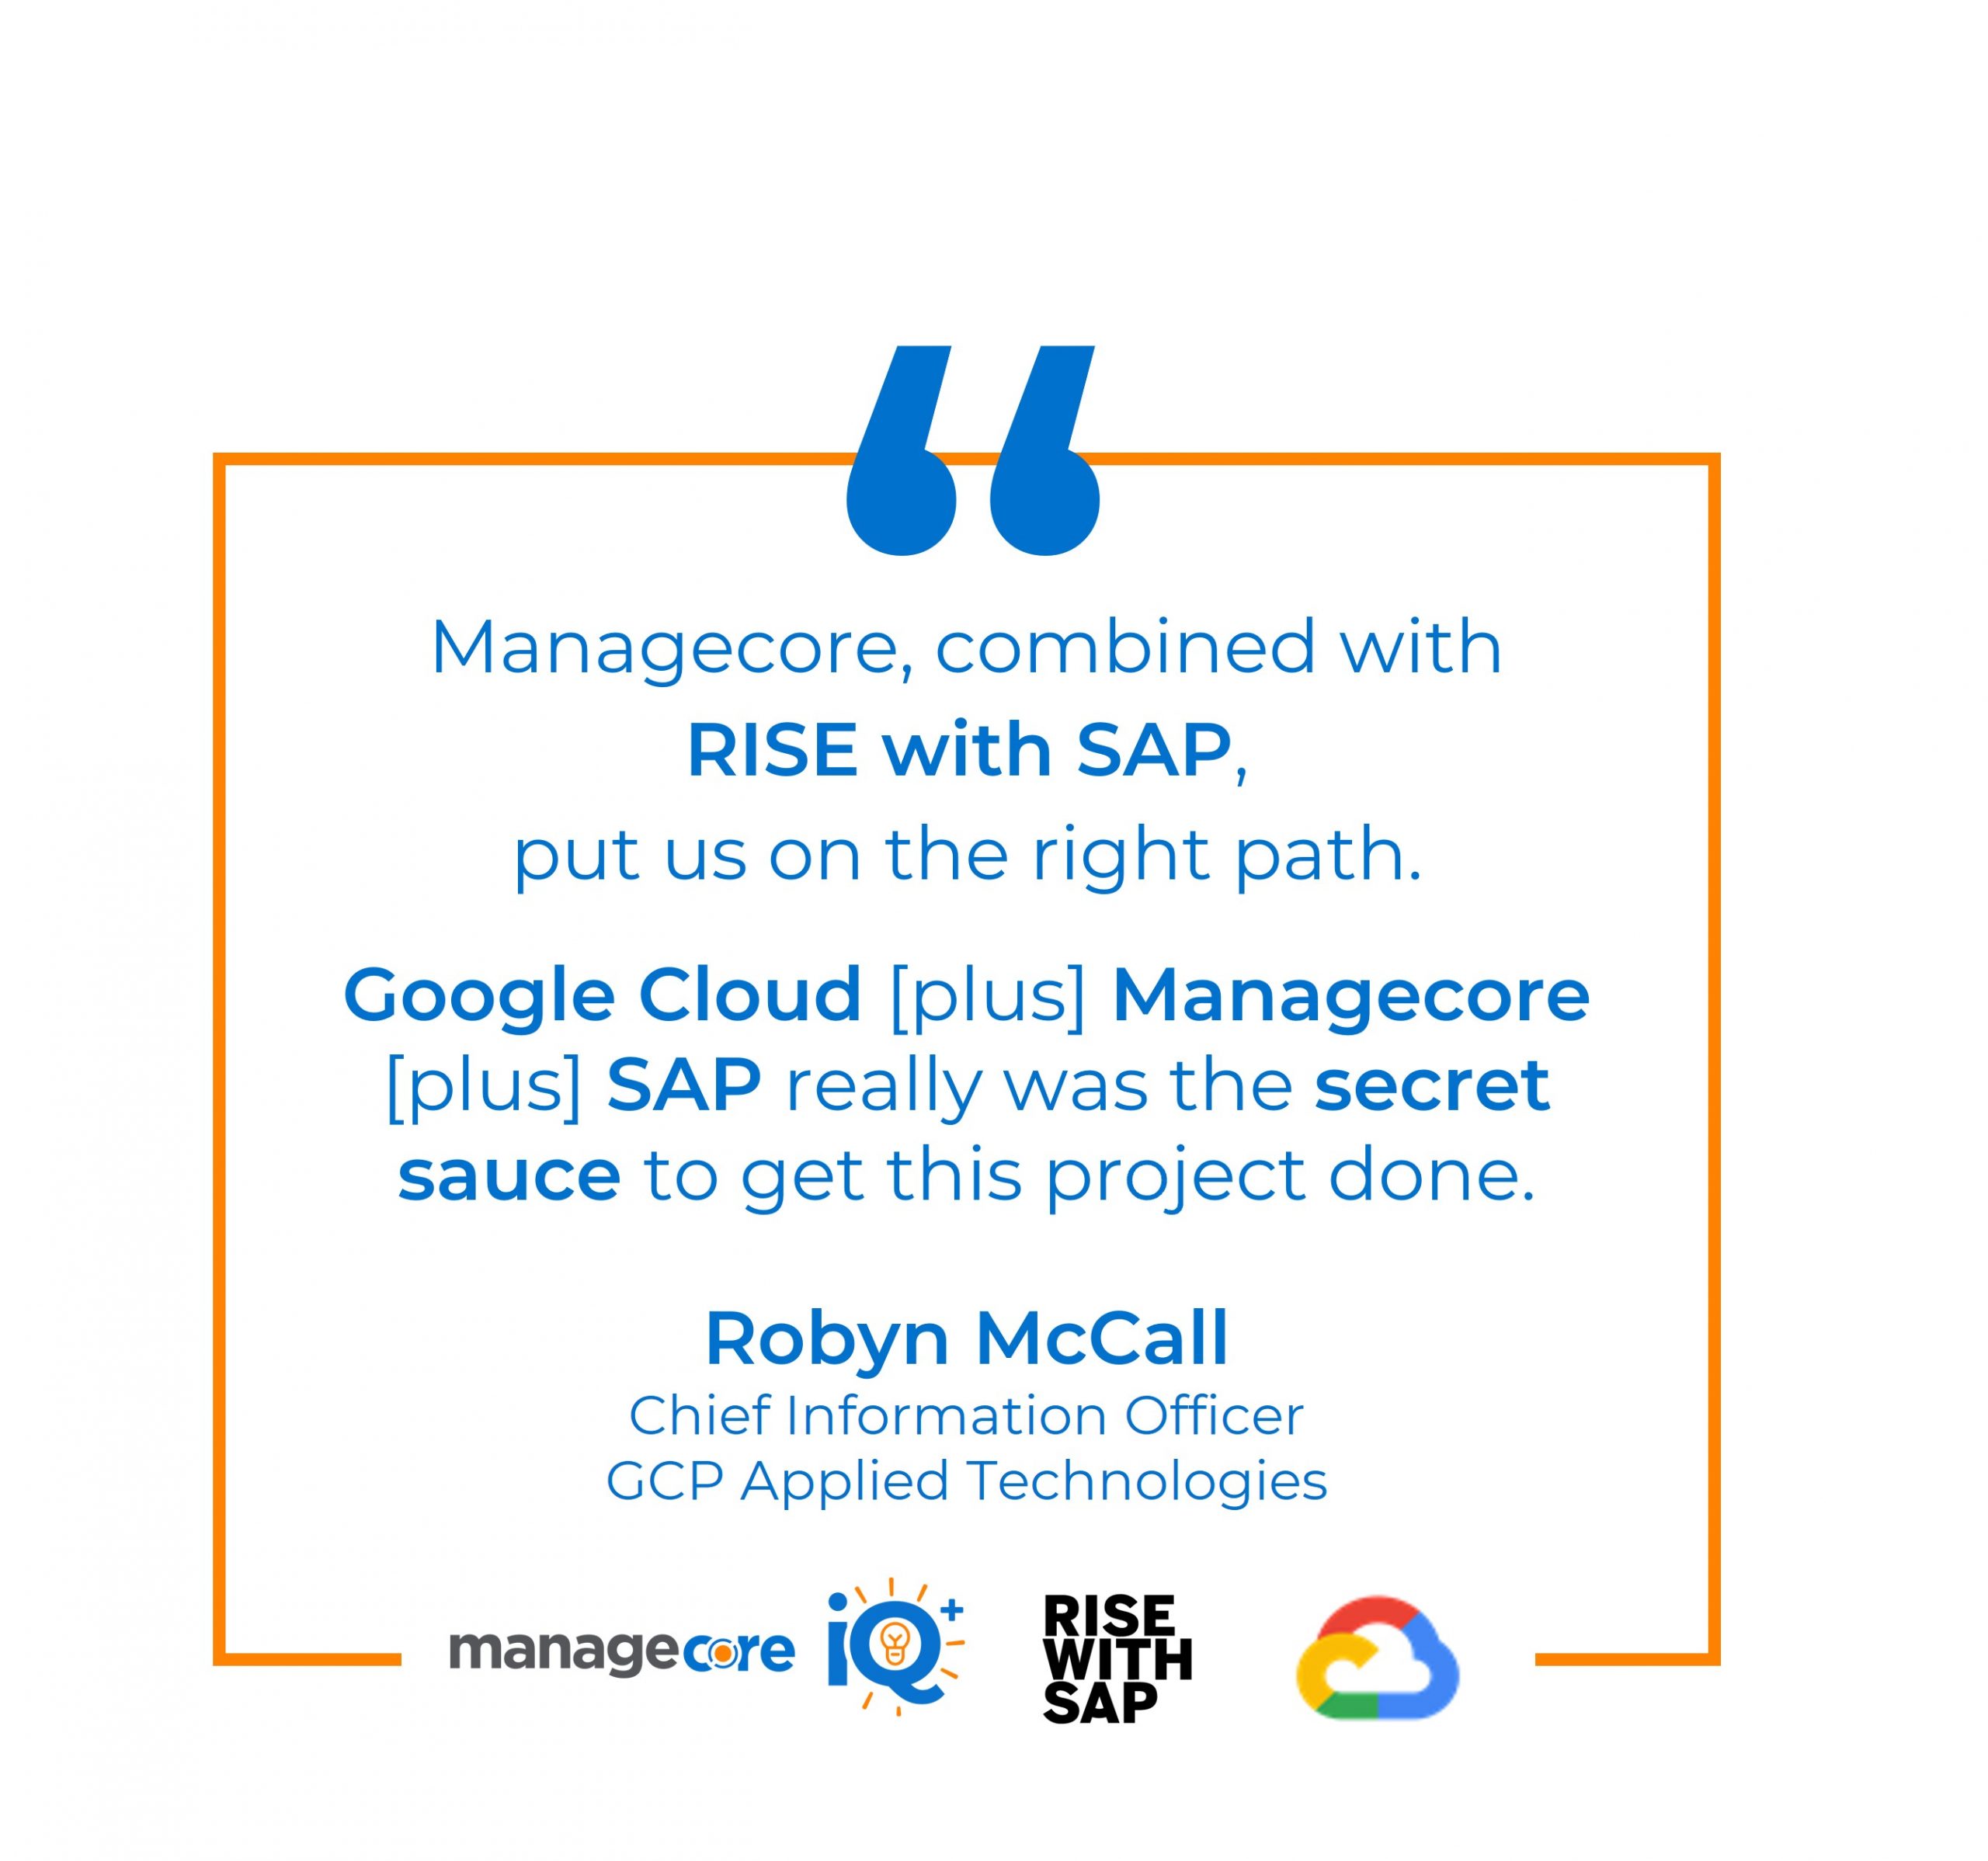 GCP Applied Technologies RISE with SAP powered by Google Cloud managed by Managecore